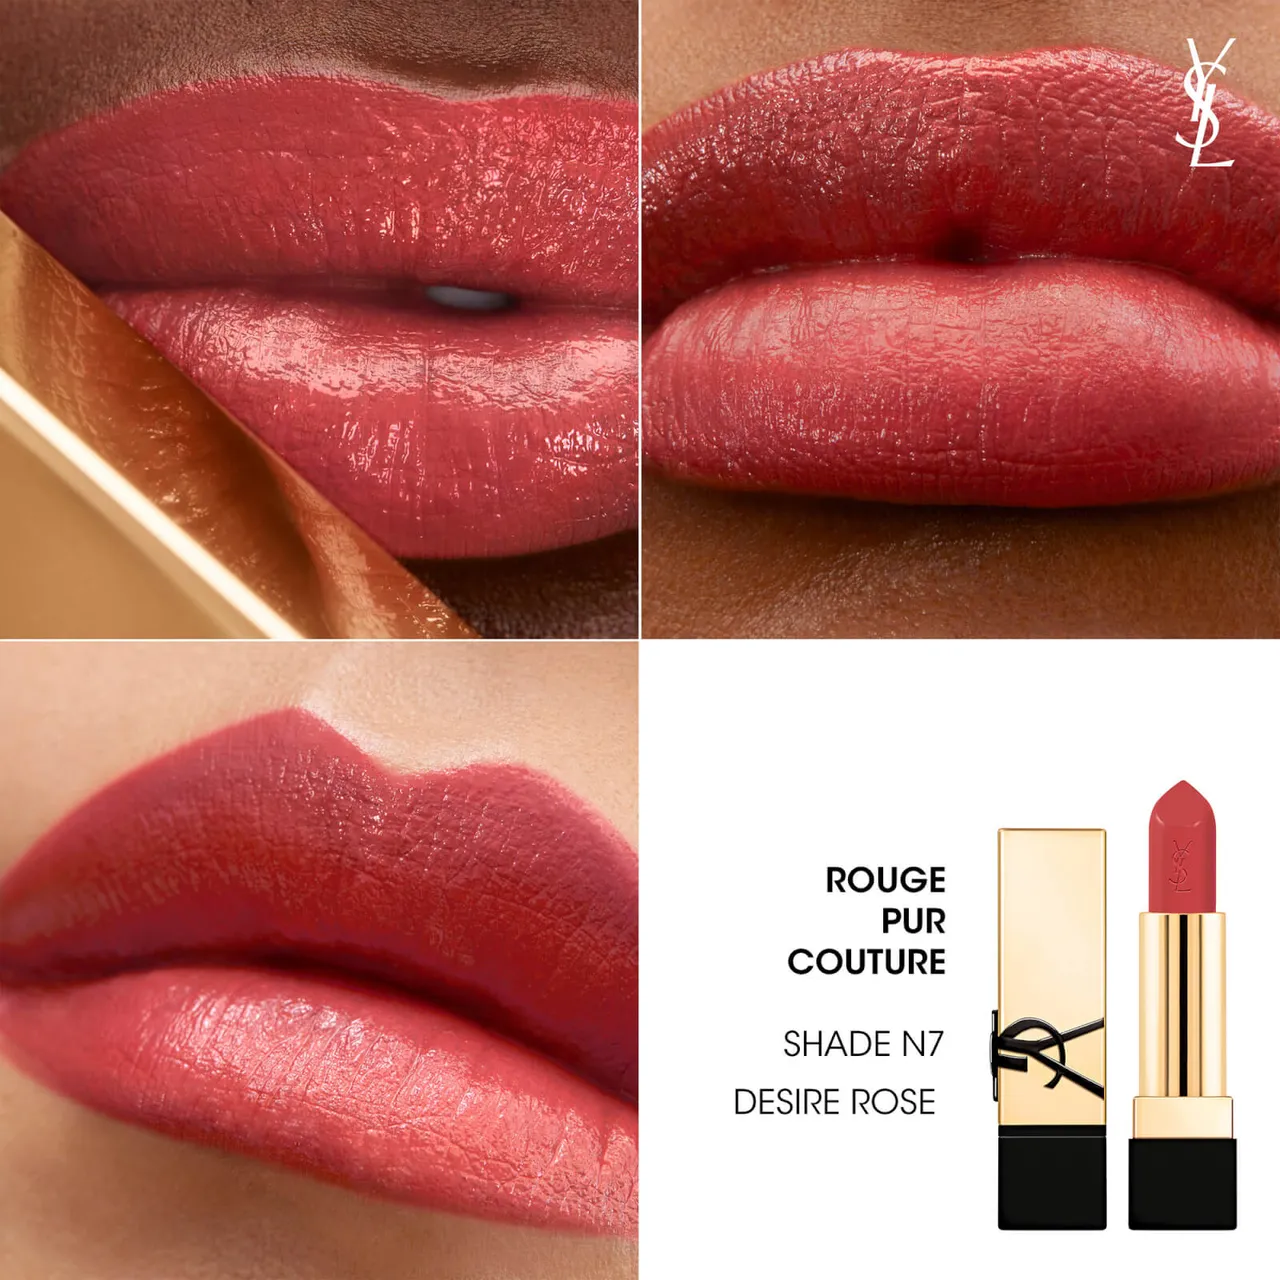 Yves Saint Laurent Rouge Pur Couture Renovation Lipstick 3g (Various Shades) - N7